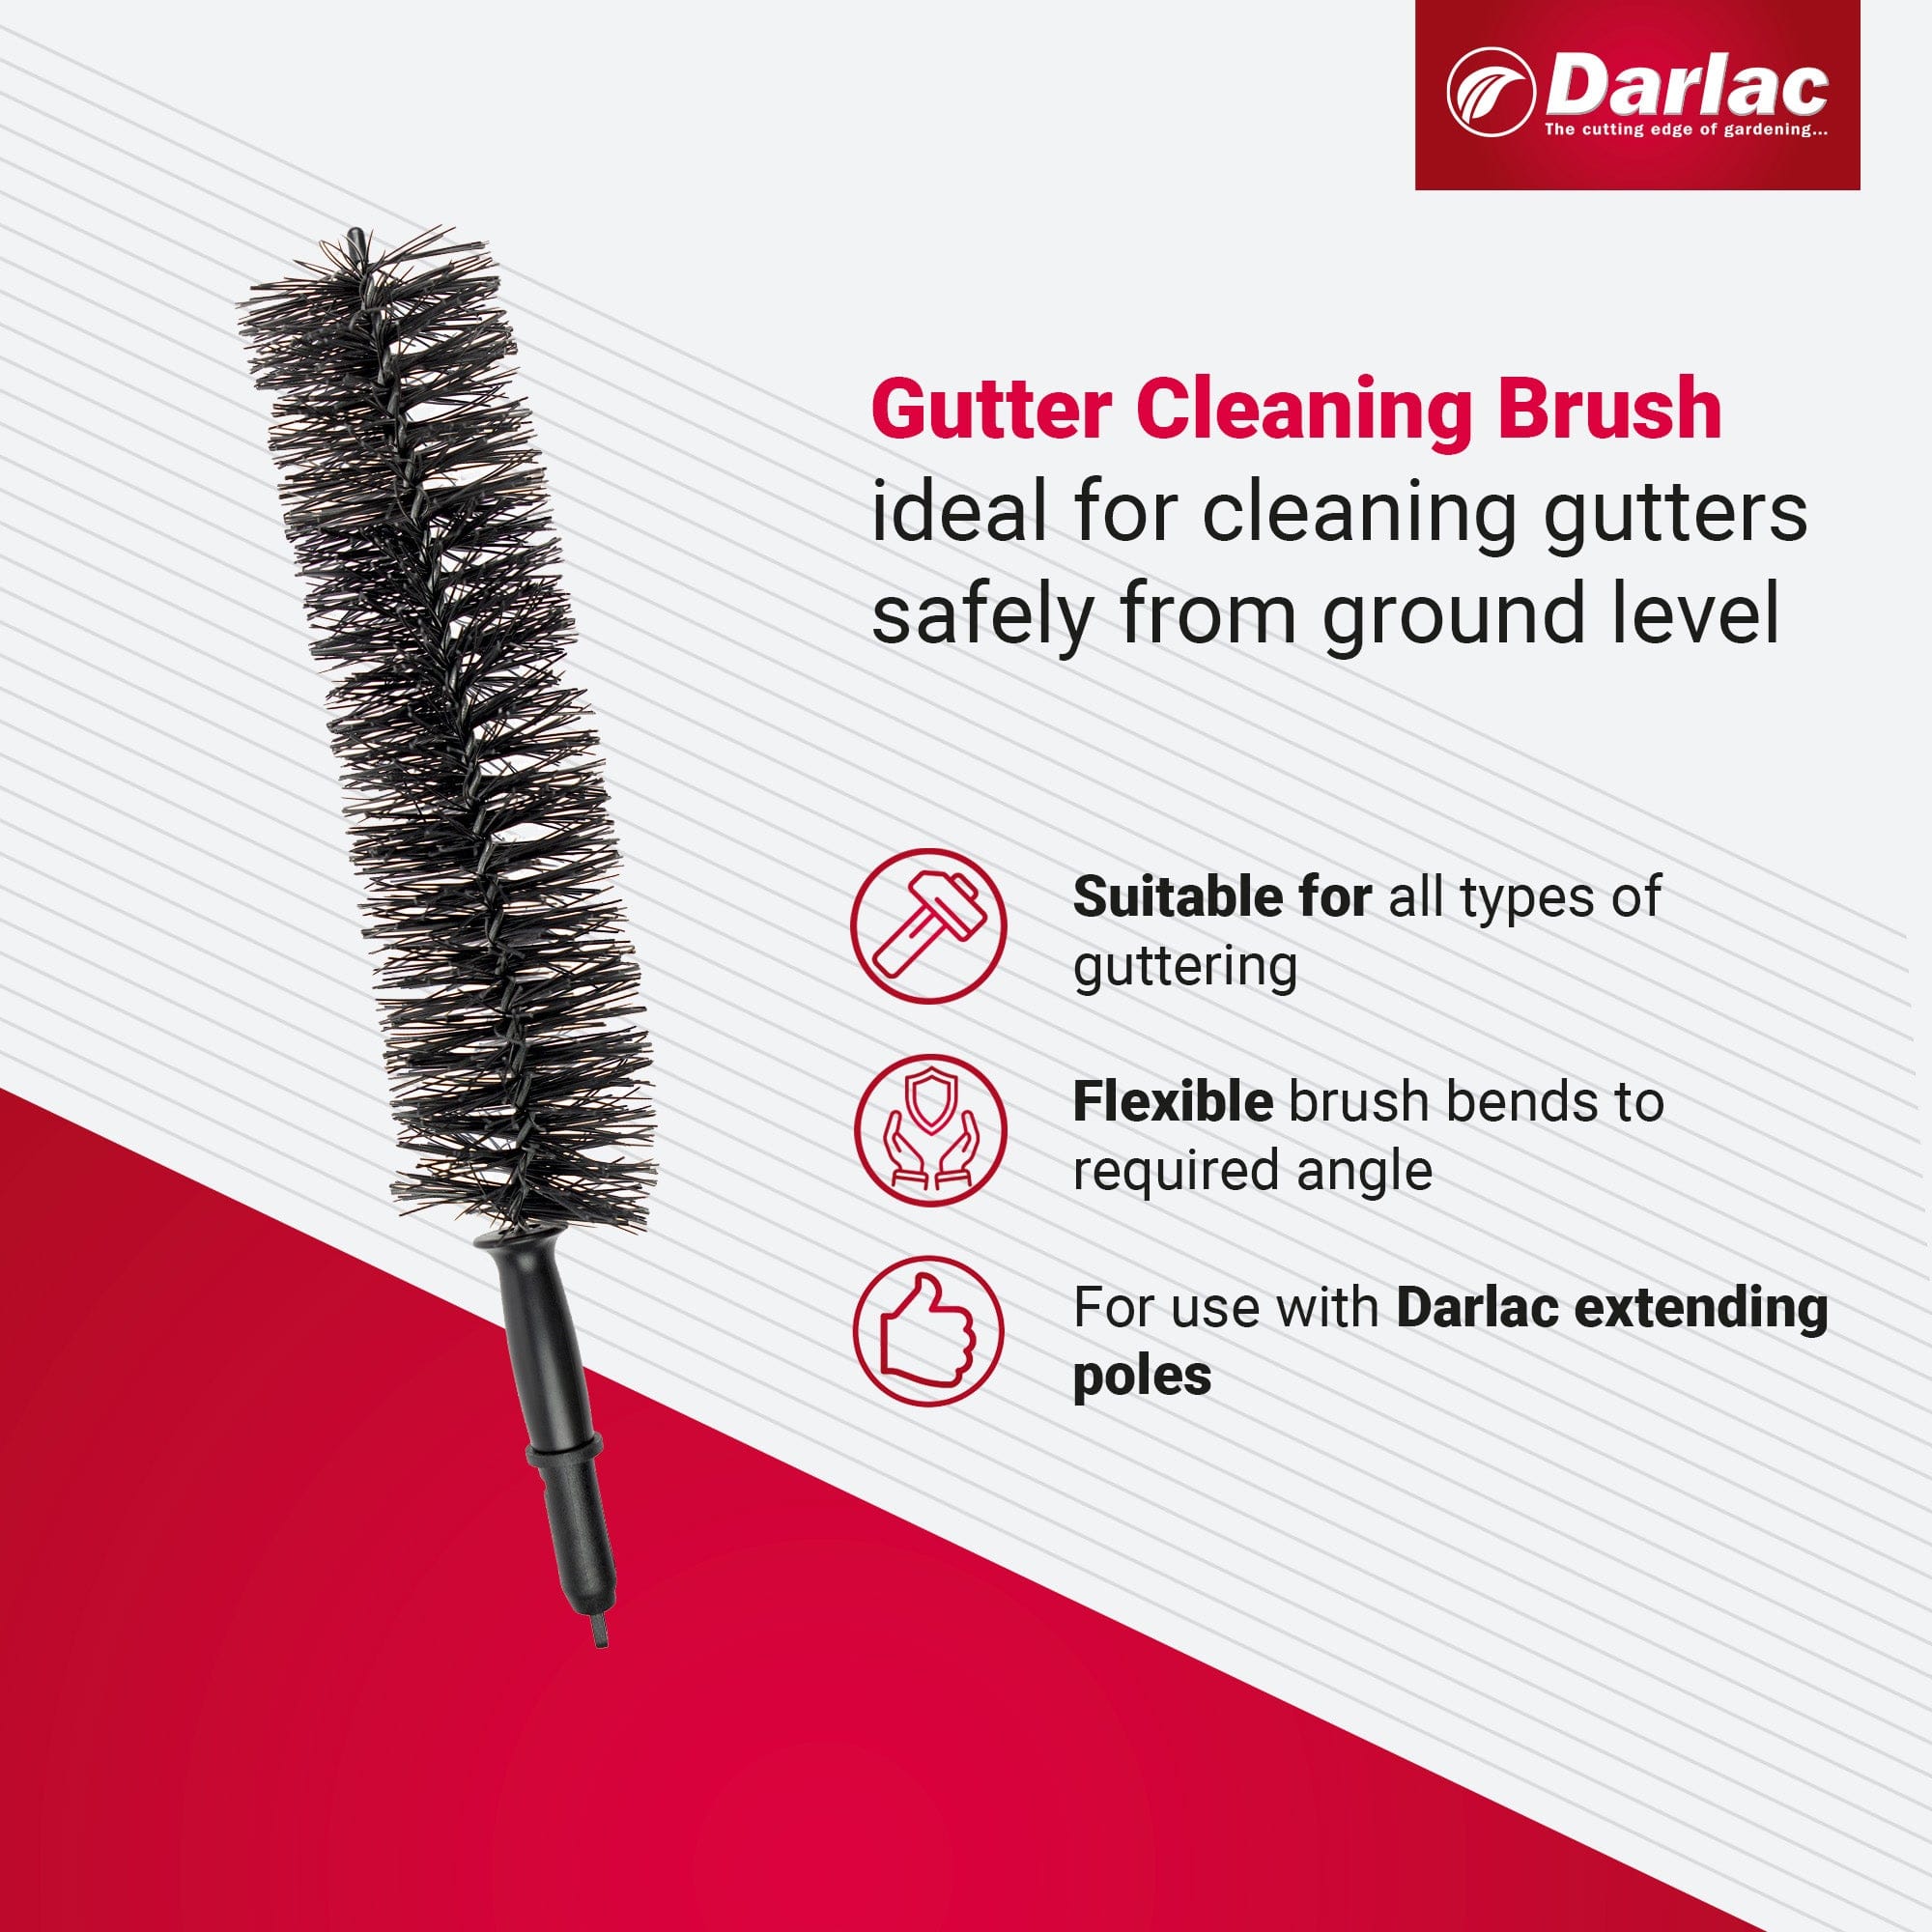 dt-brown HARDWARE Darlac Swop Top Gutter Cleaning Brush